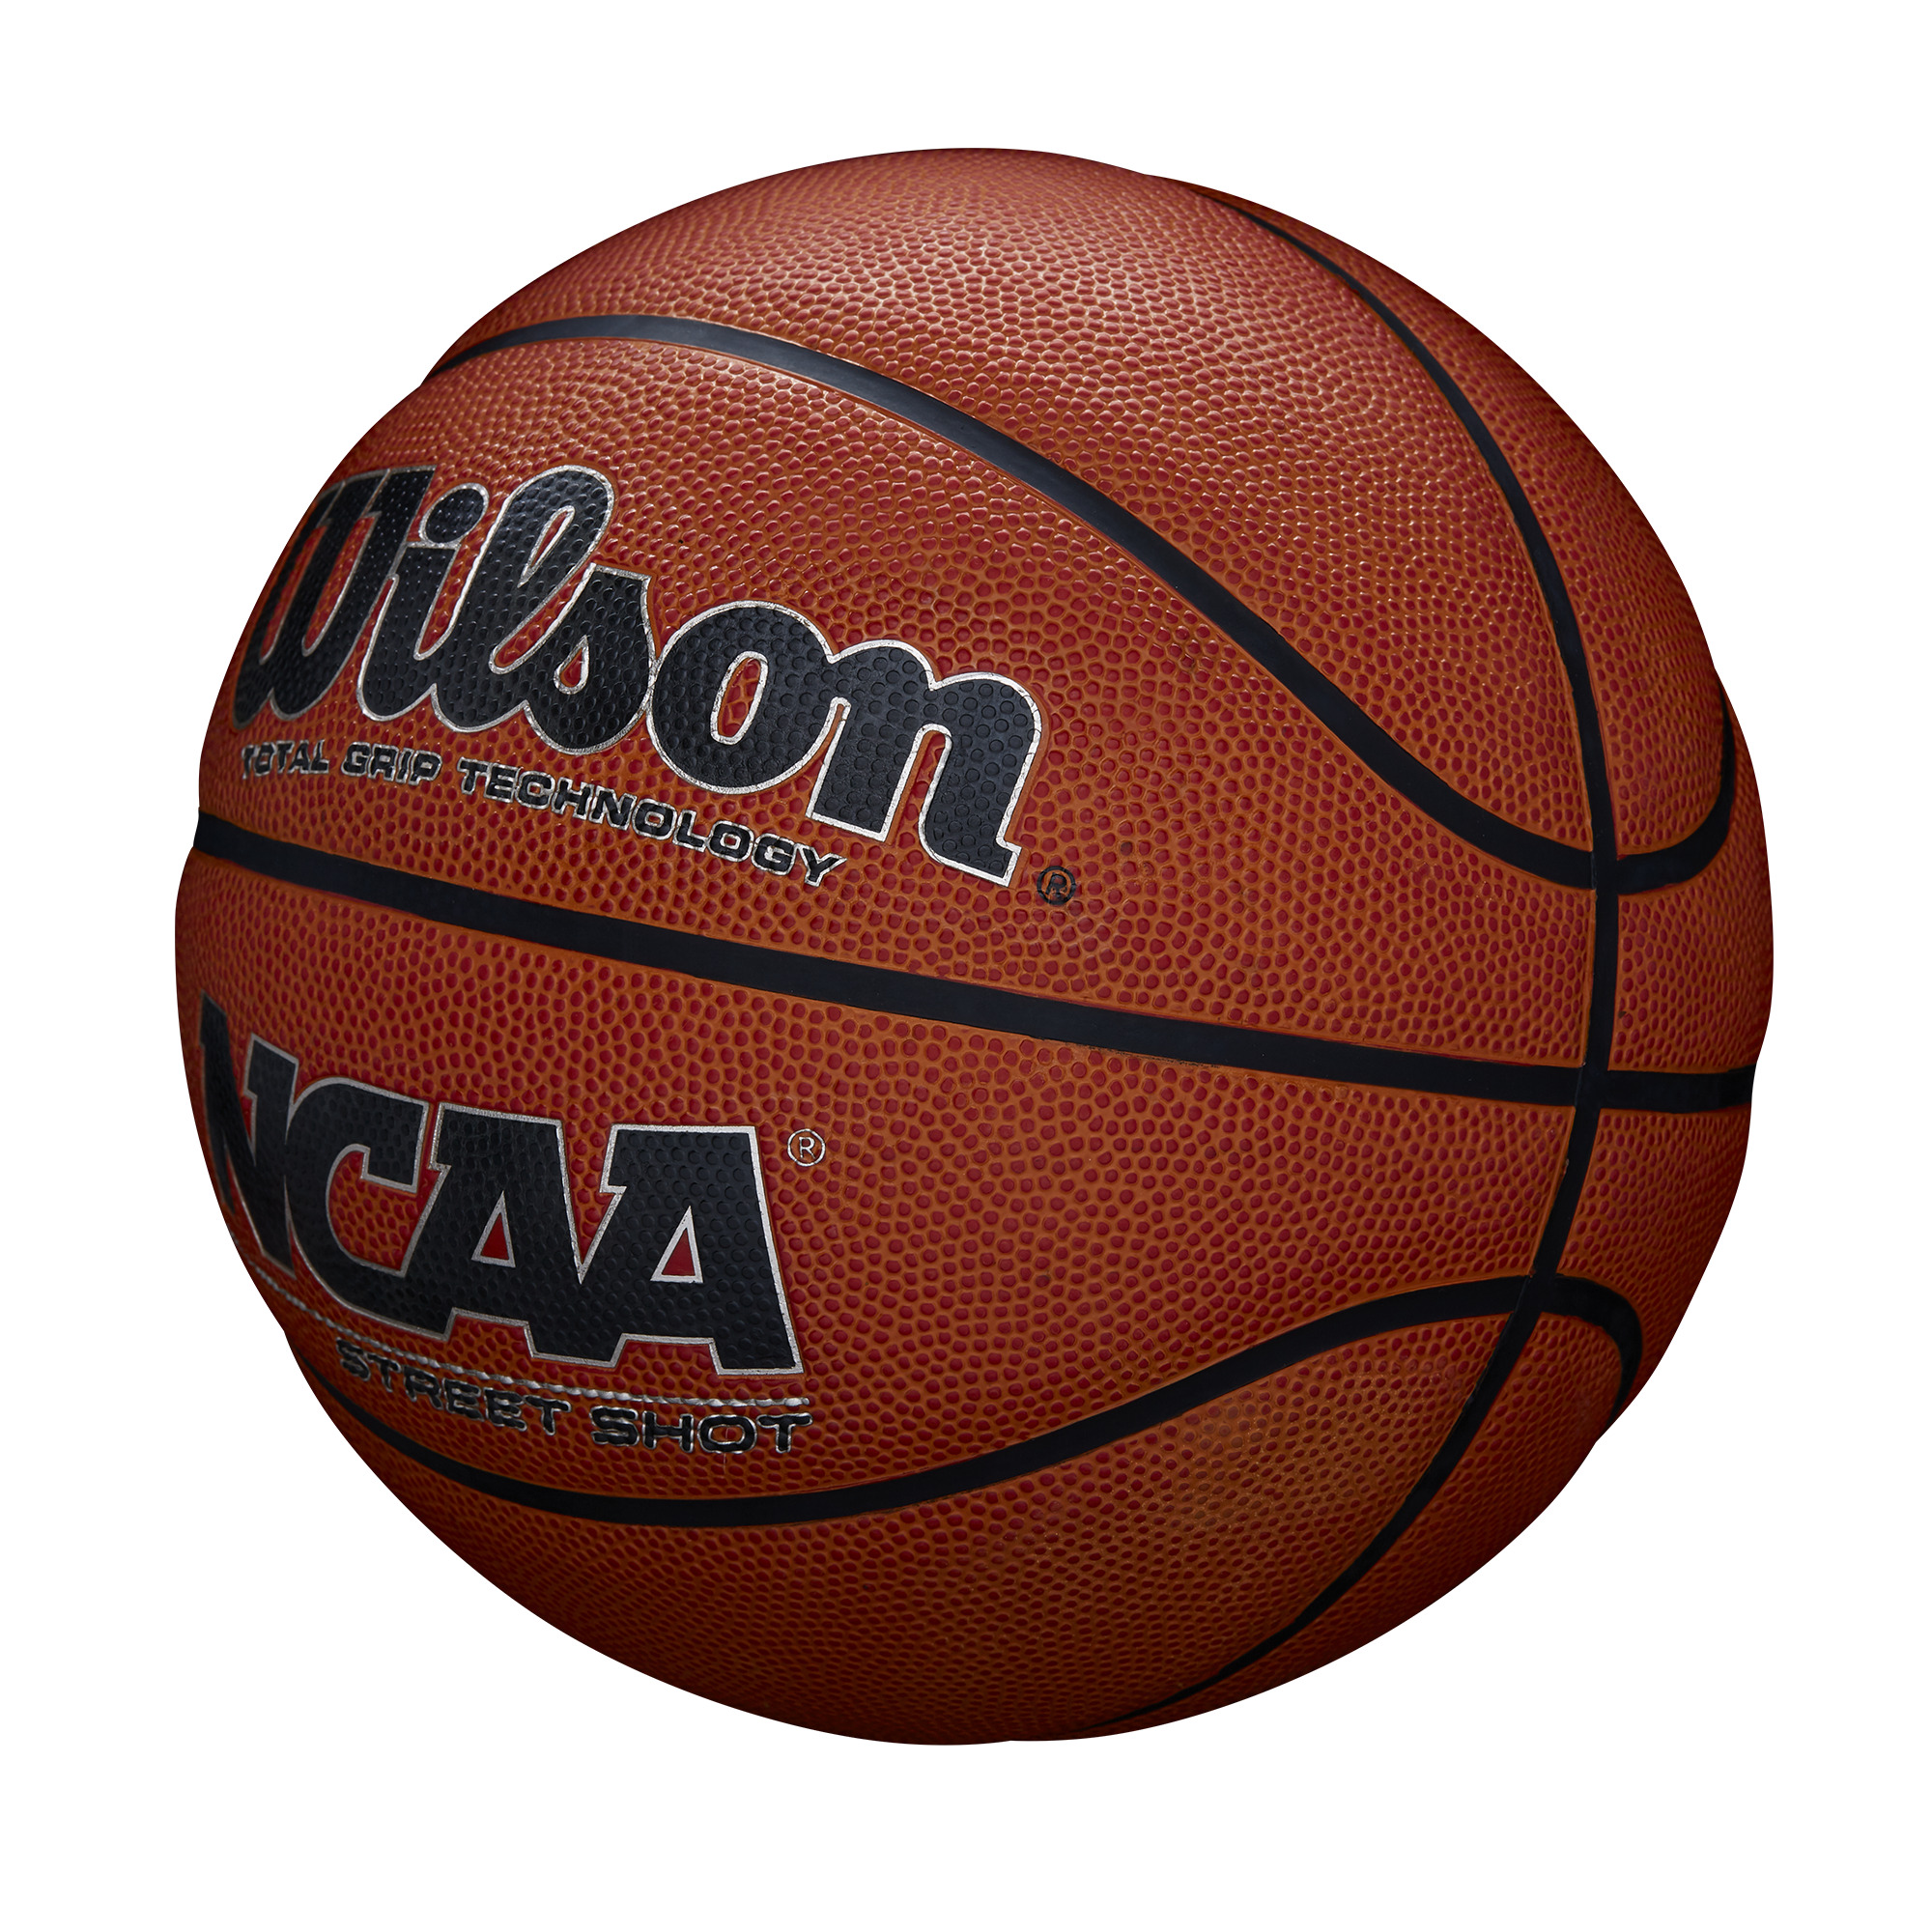 Wilson NCAA Street Shot Outdoor Basketball, Official Size 29.5" - image 3 of 6